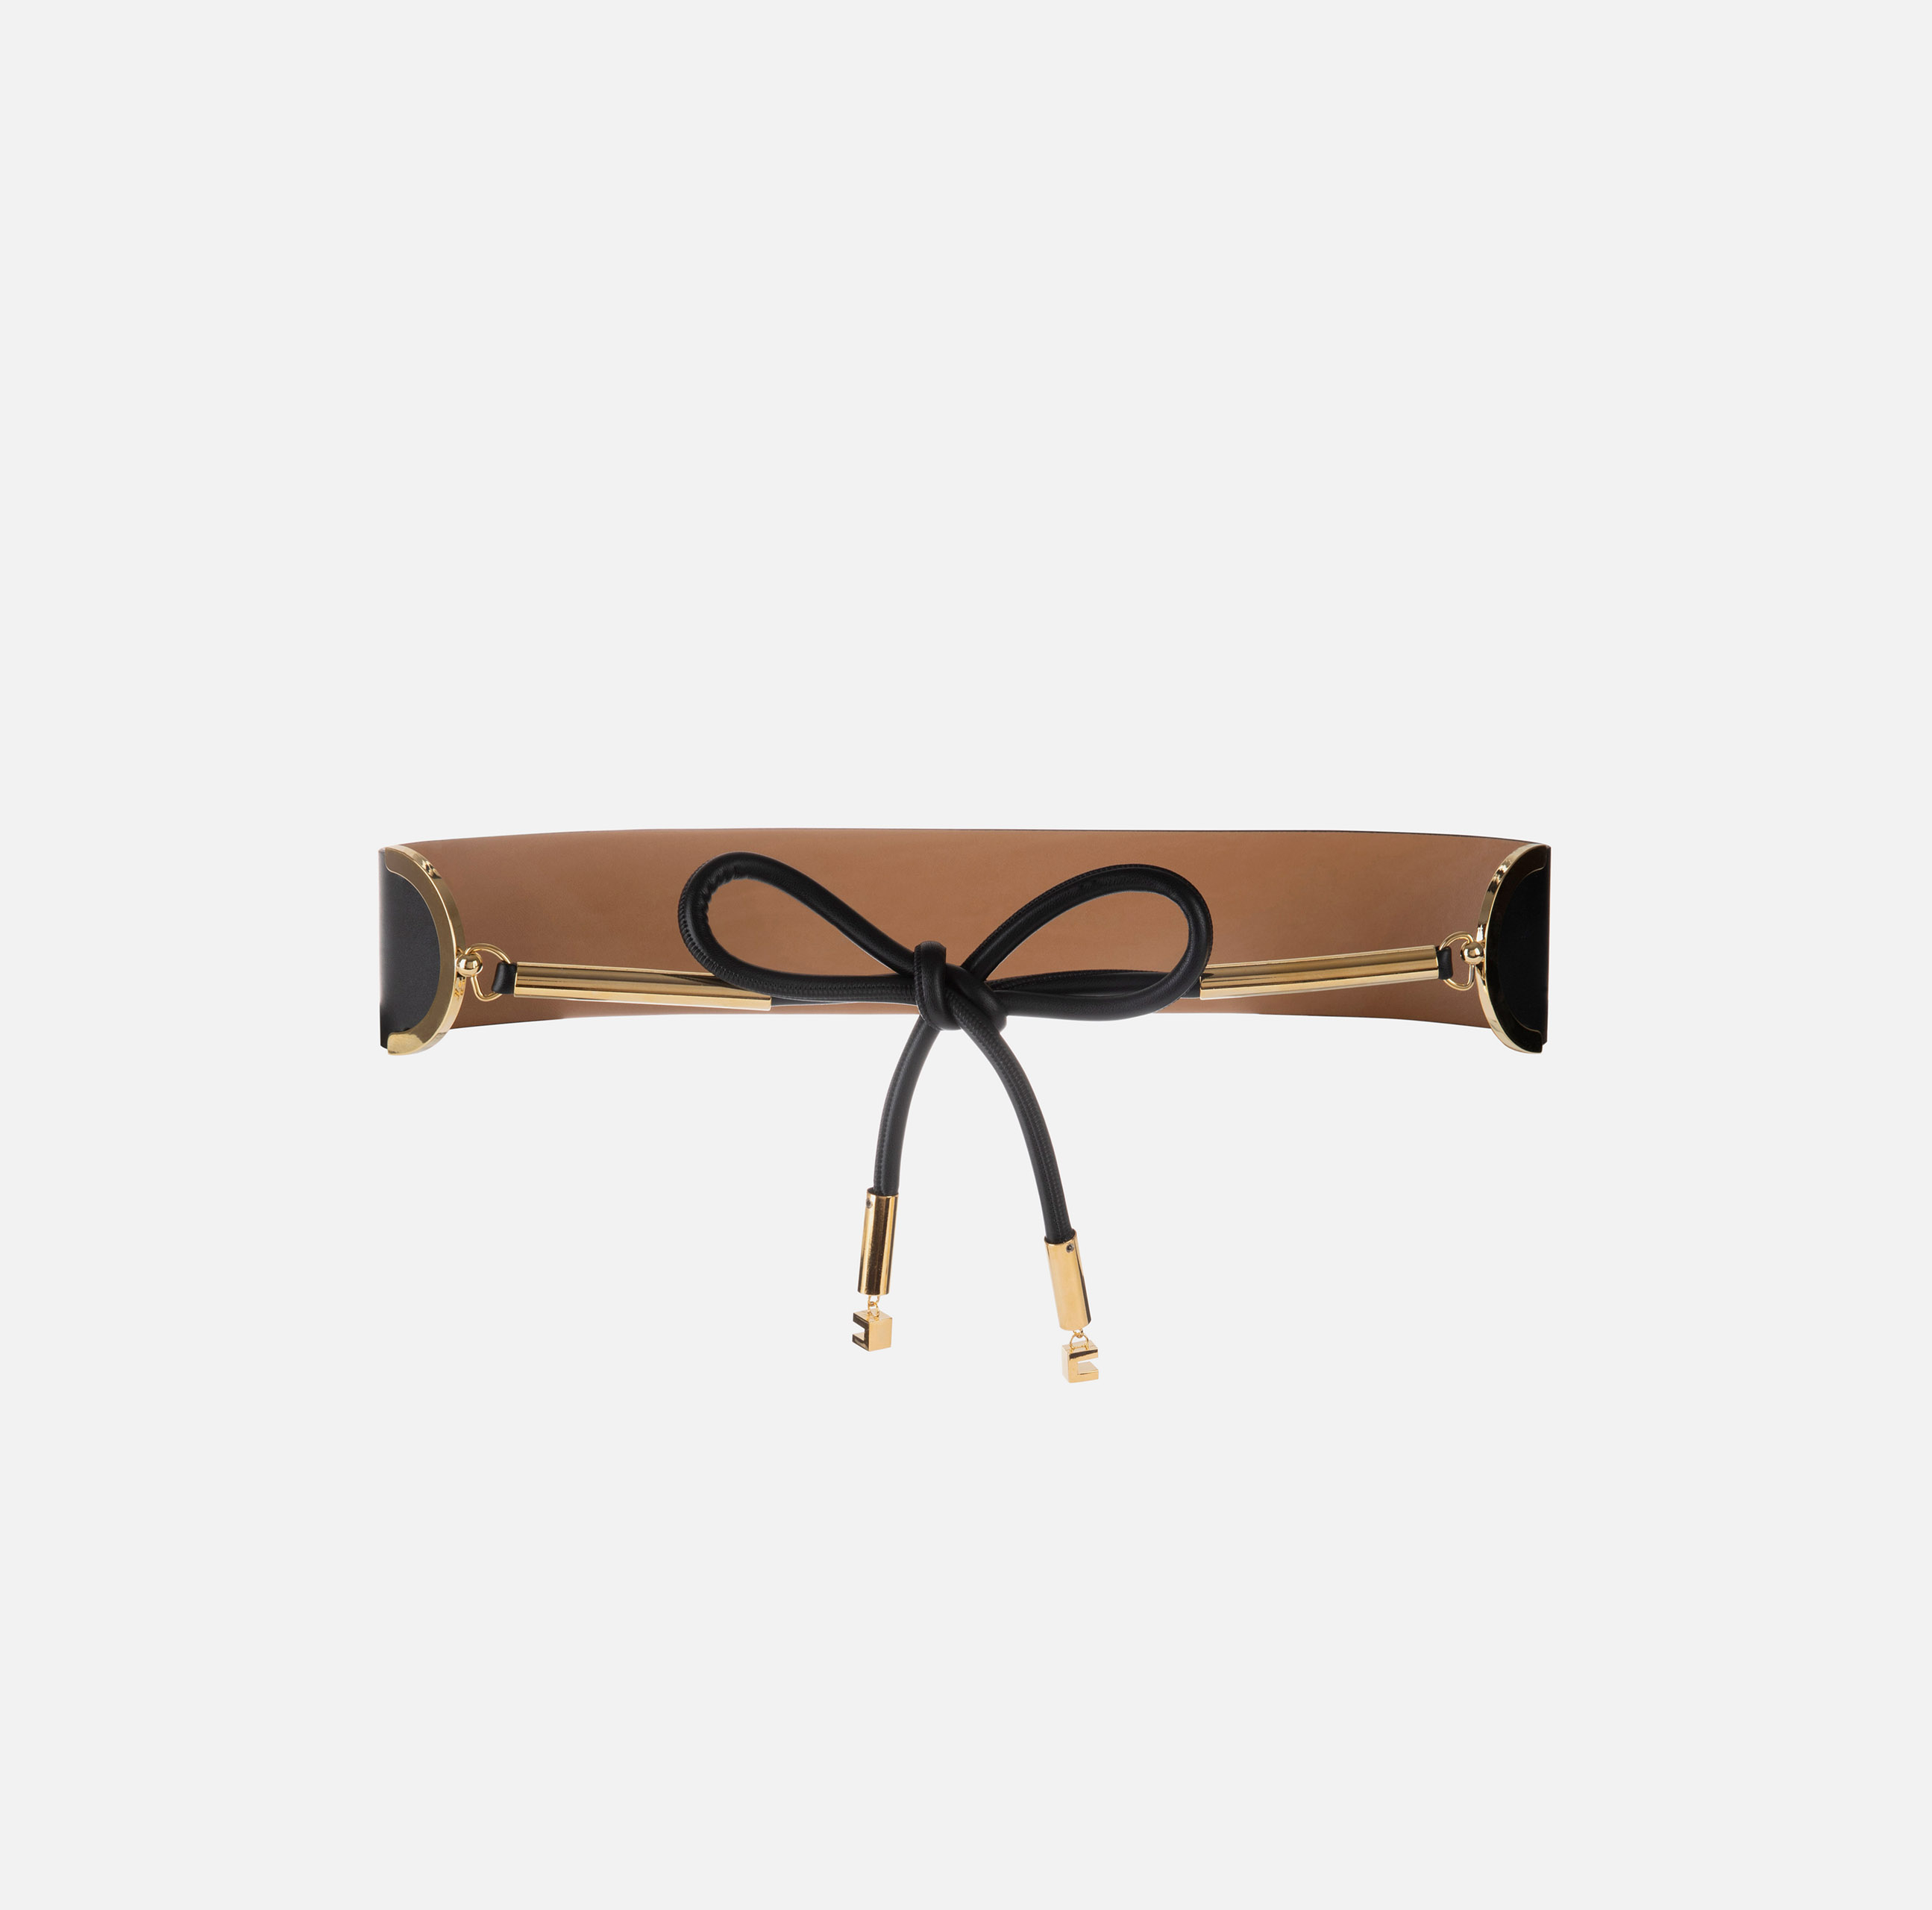 Synthetic material wide belt with knot - Elisabetta Franchi